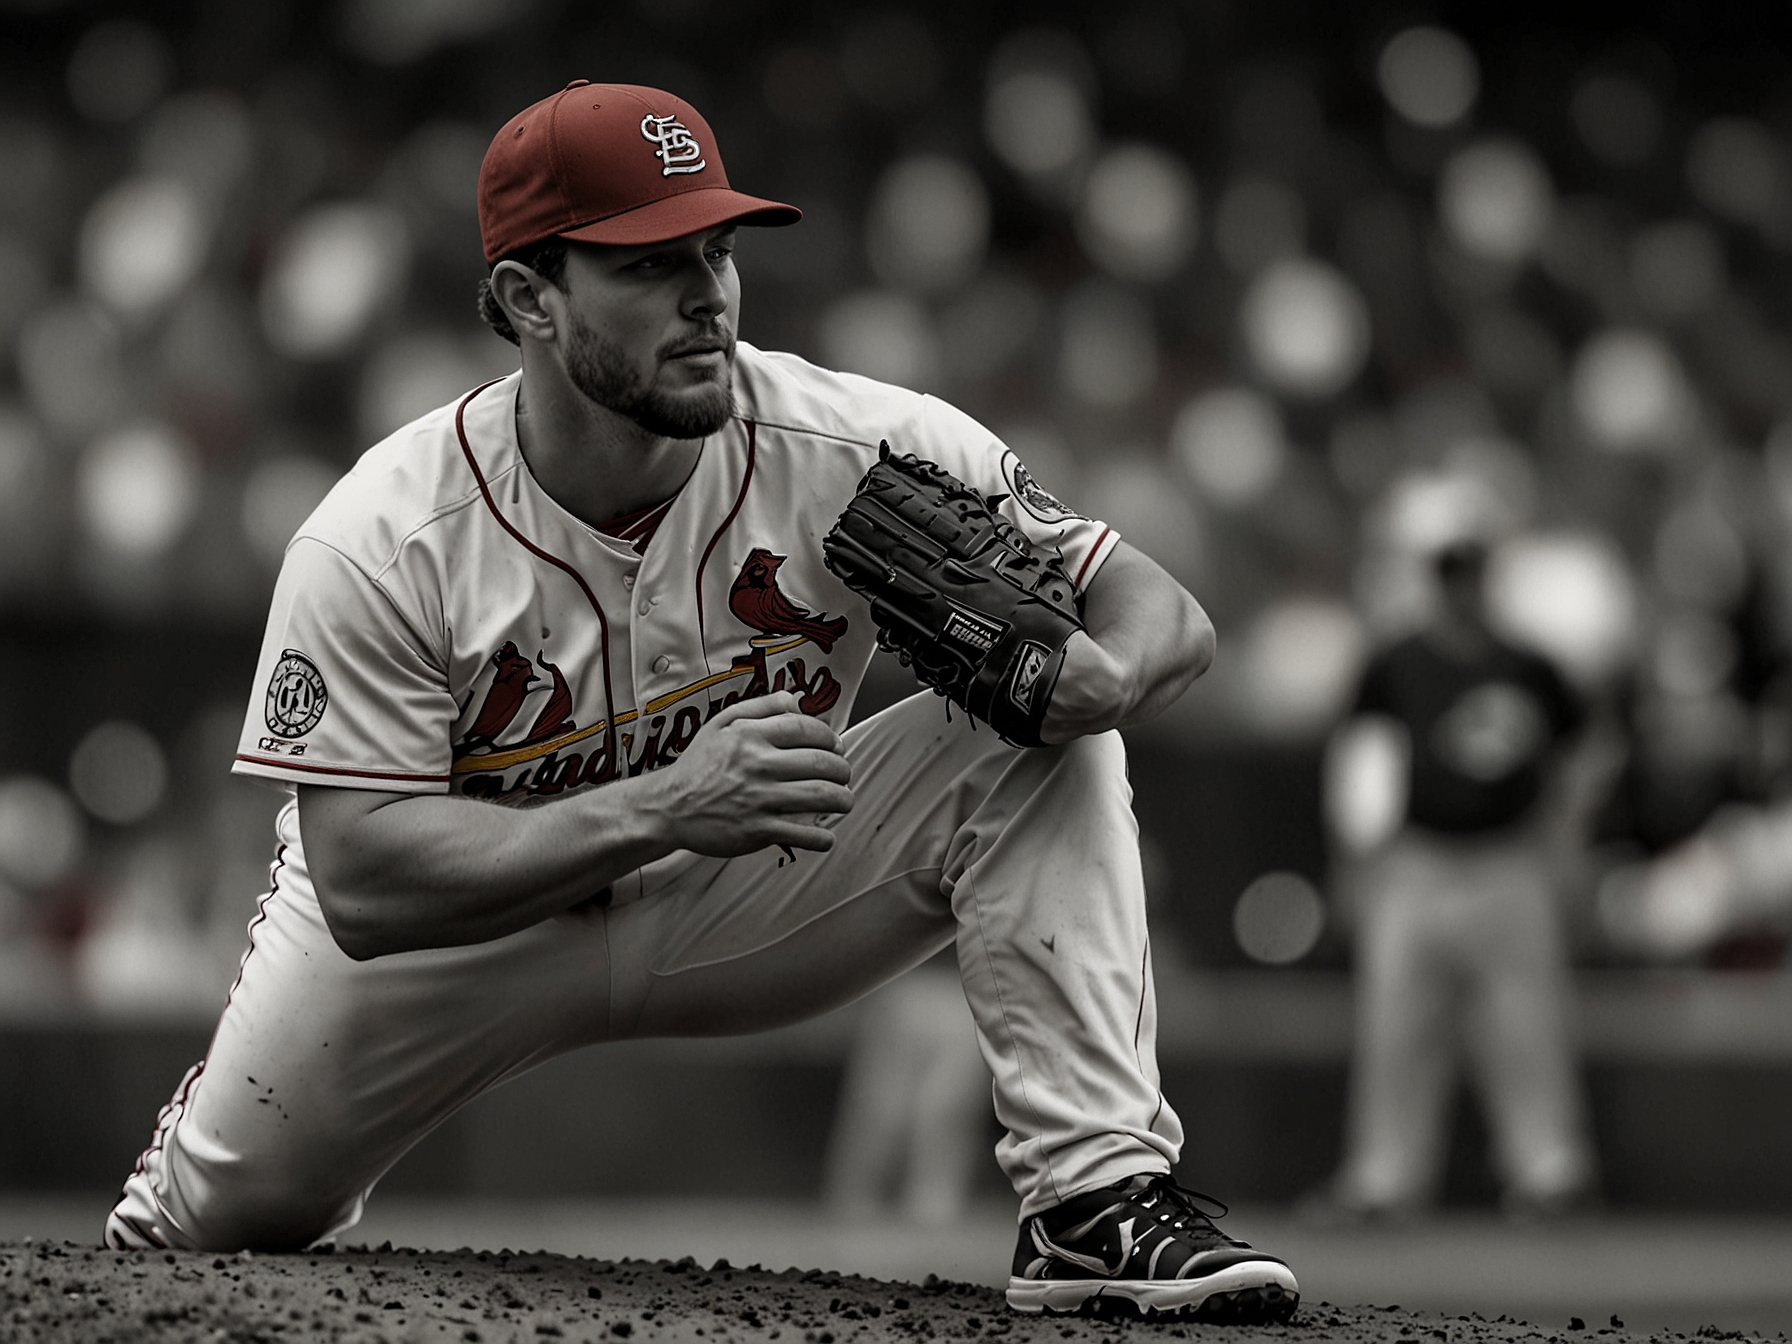 Matthew Liberatore, on the mound, pitching with intensity. The young left-hander's performance was crucial in leading the St. Louis Cardinals to victory against the Atlanta Braves.